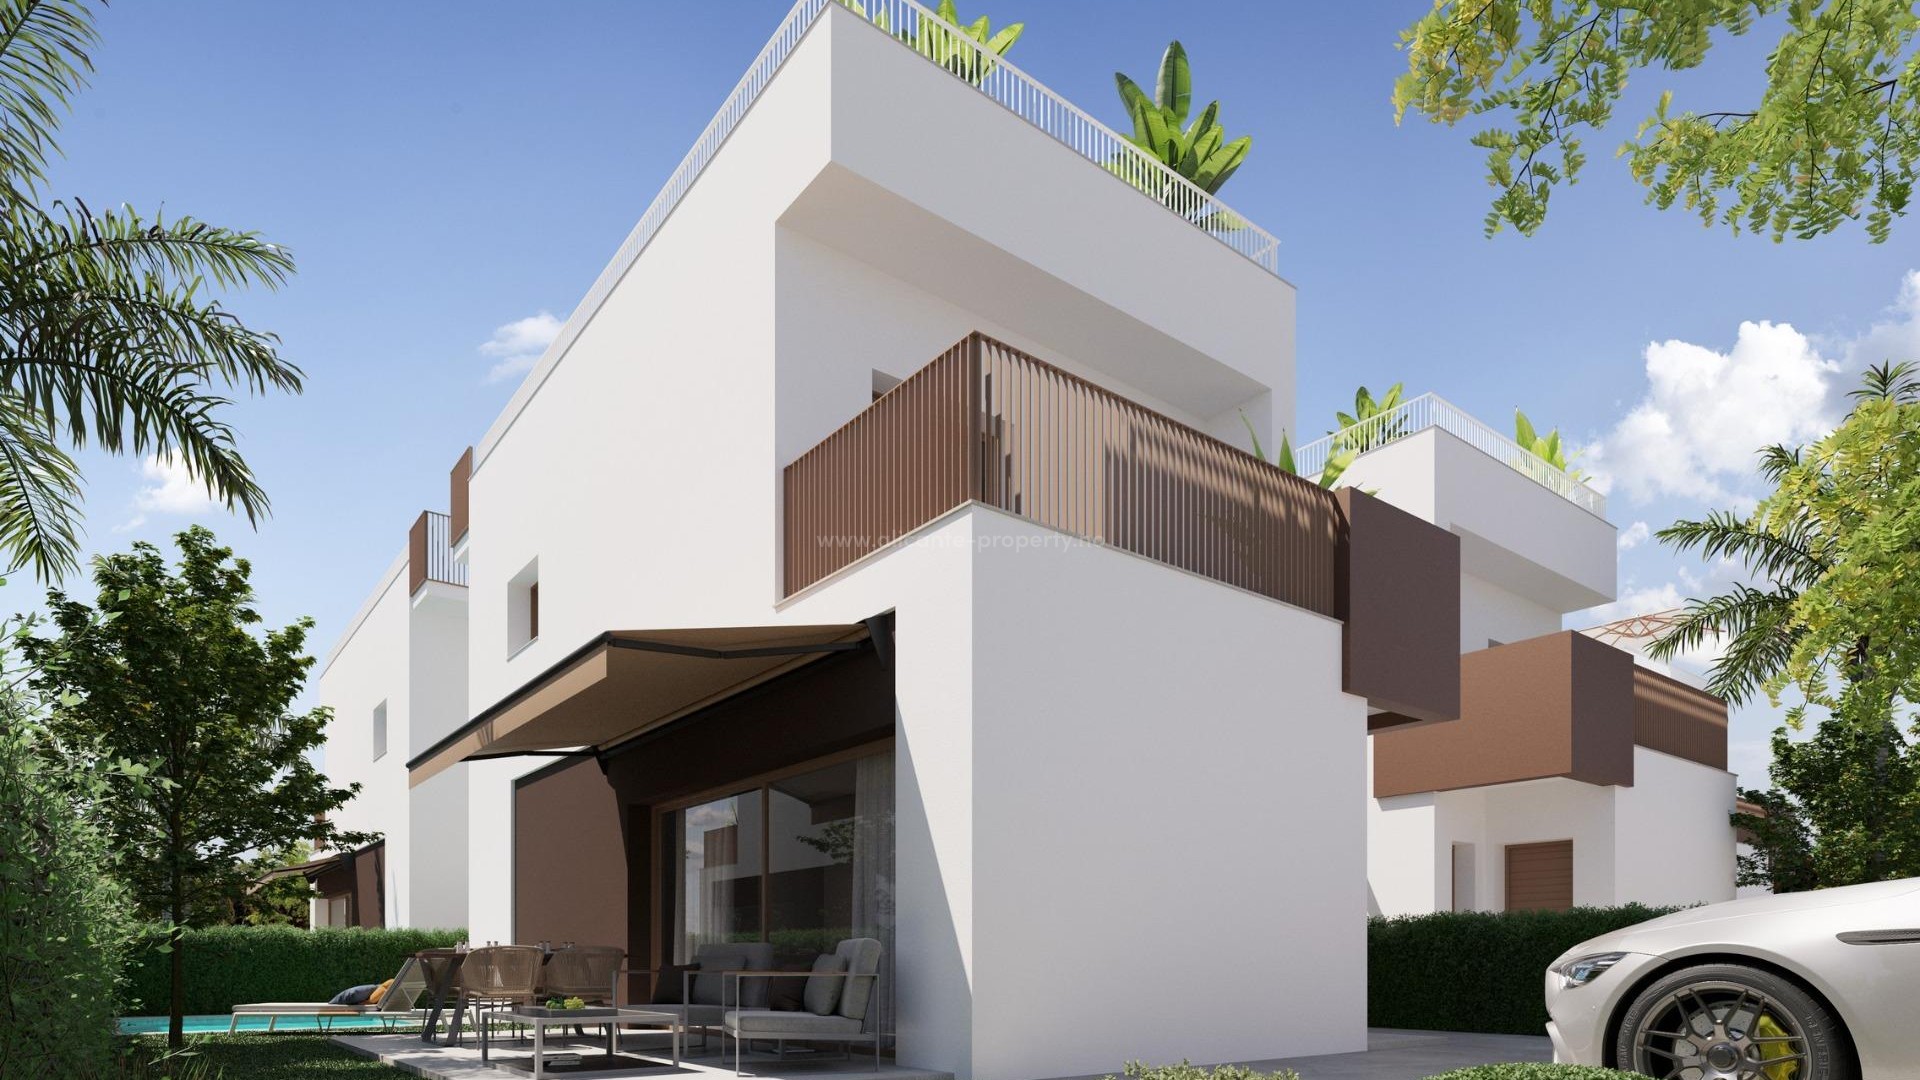 Modern villa 500 meters from Pinet beach in La Marina with 3 bedrooms and 3 bathrooms, private pool and terraces.